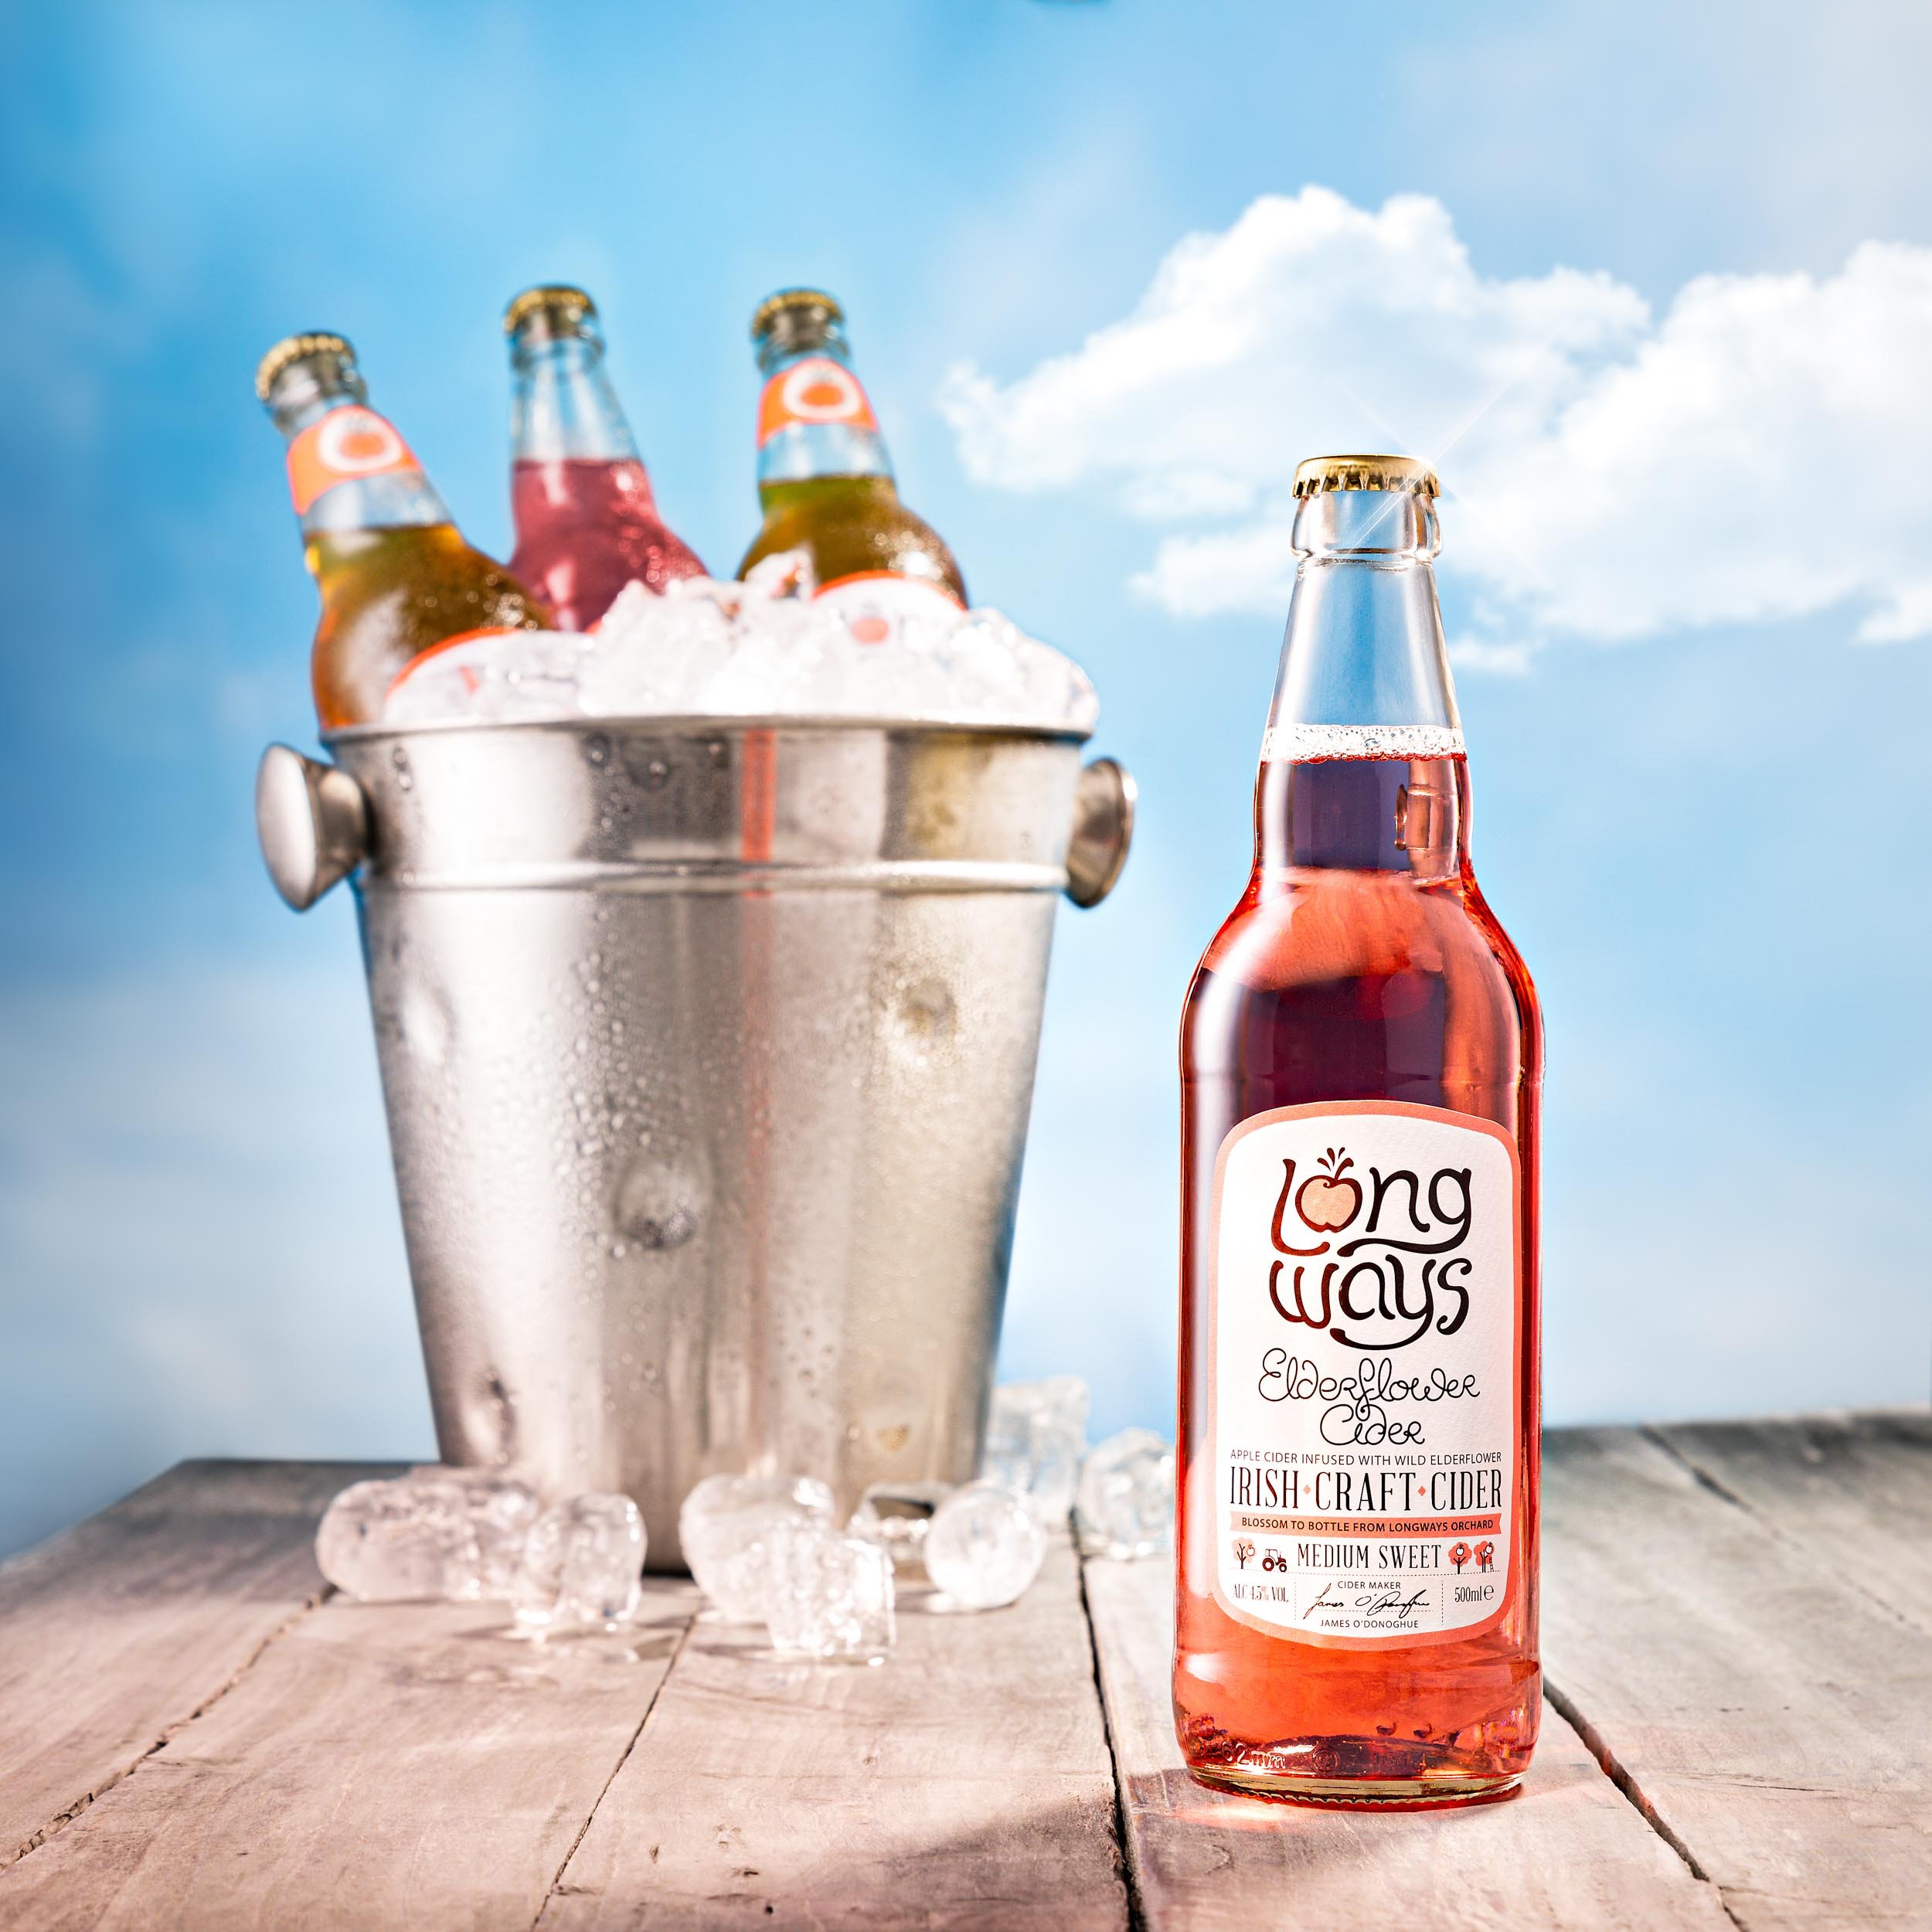 Longways Cider on ice | Commercial Product Image